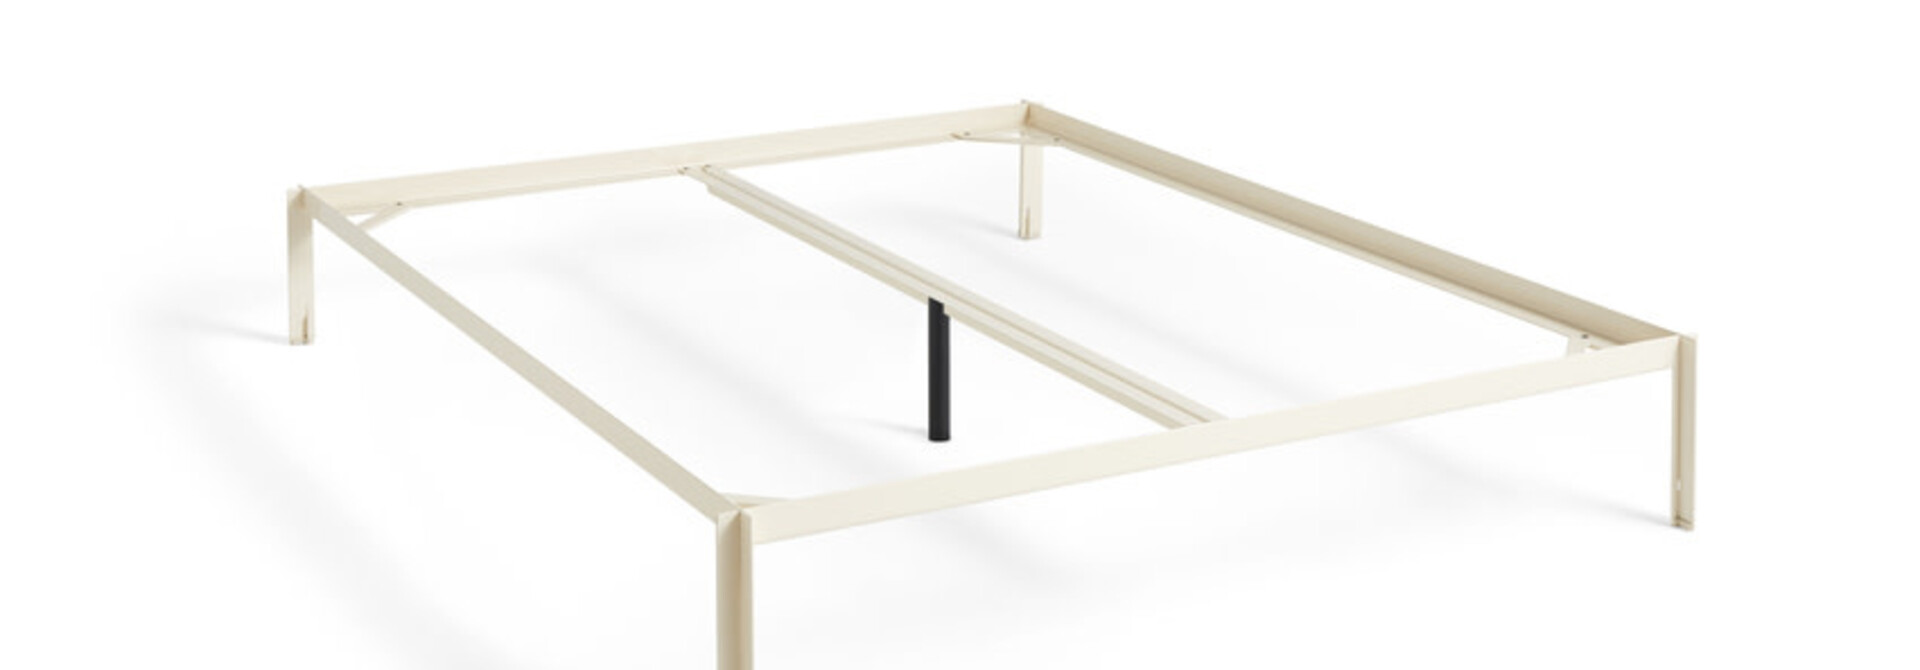 Connect Bed Frame 160x200cm